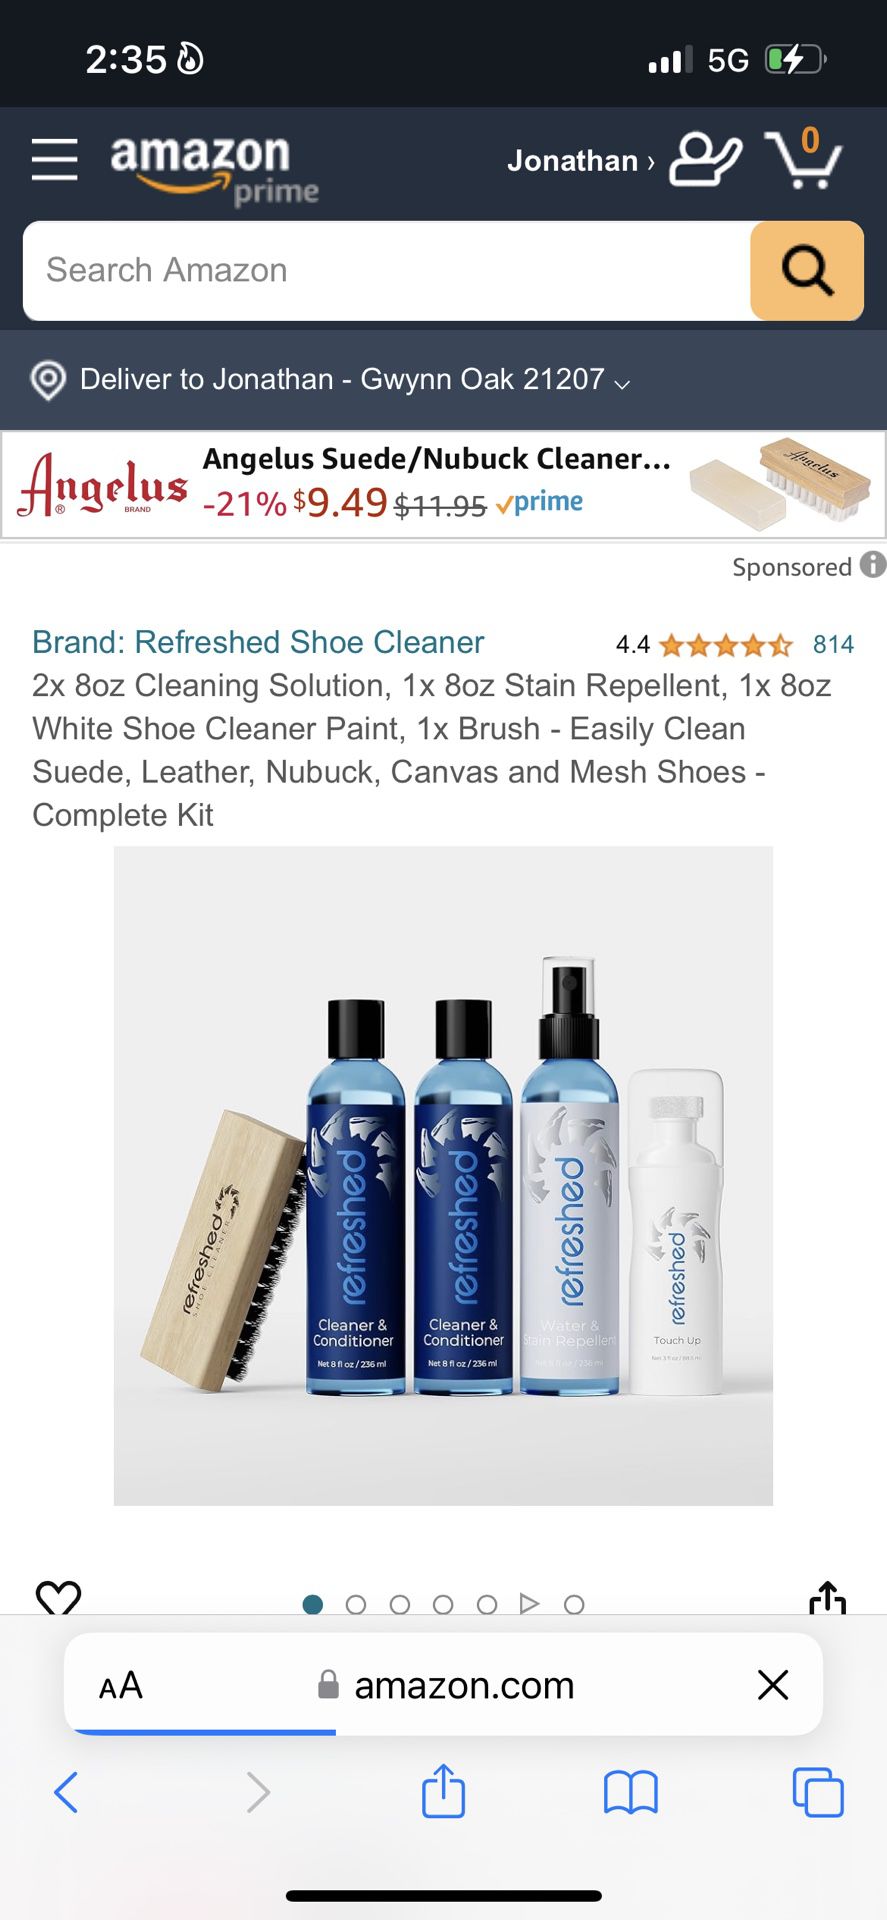 Refreshed Shoe Cleaner 